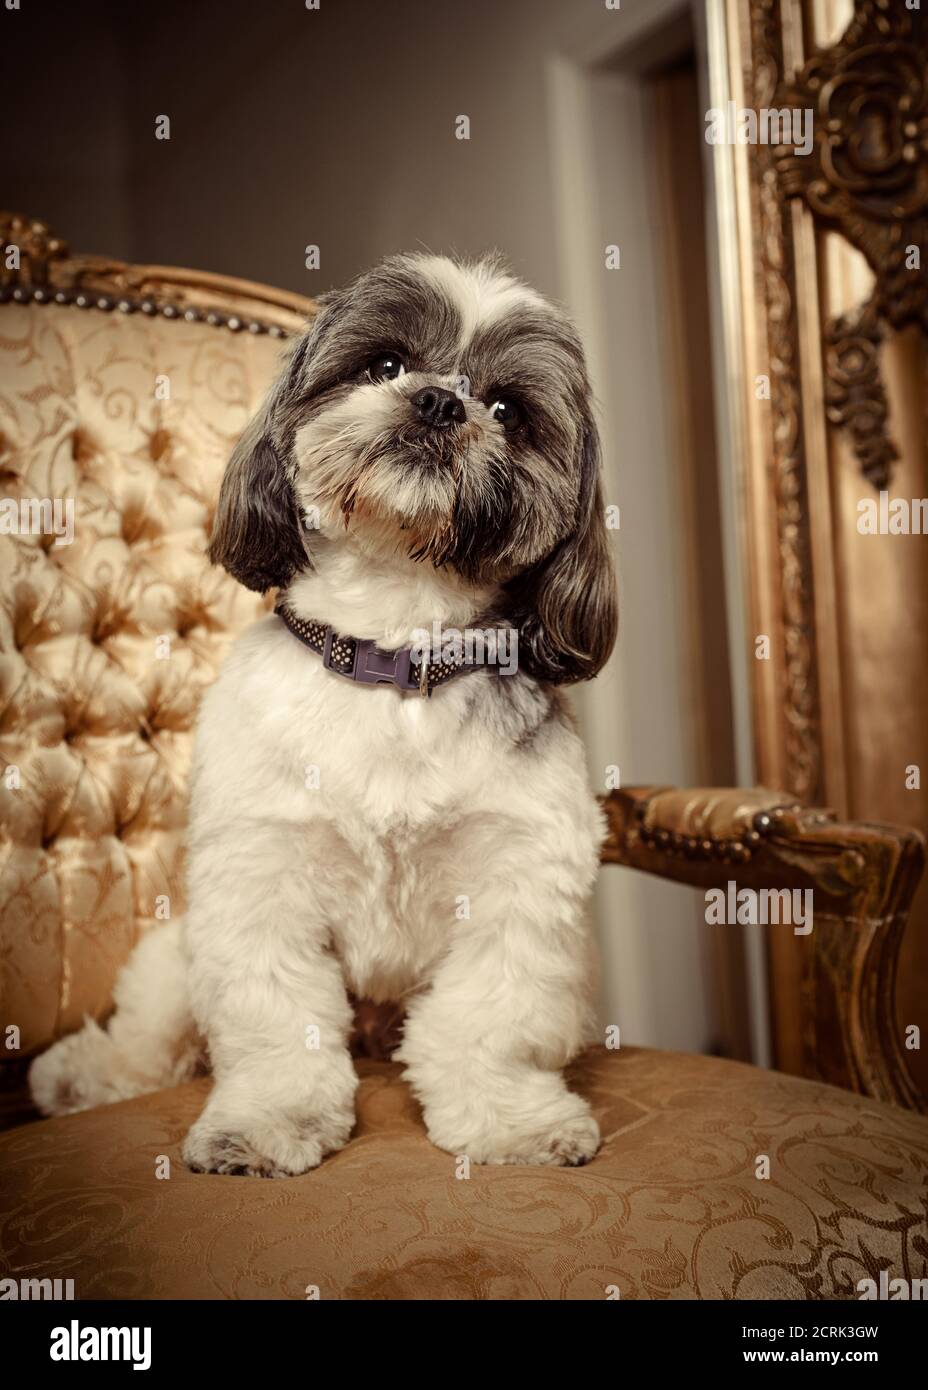 Adorable Shih Tzu pedigree dog sitting on a gold chair looking at the viewer Stock Photo